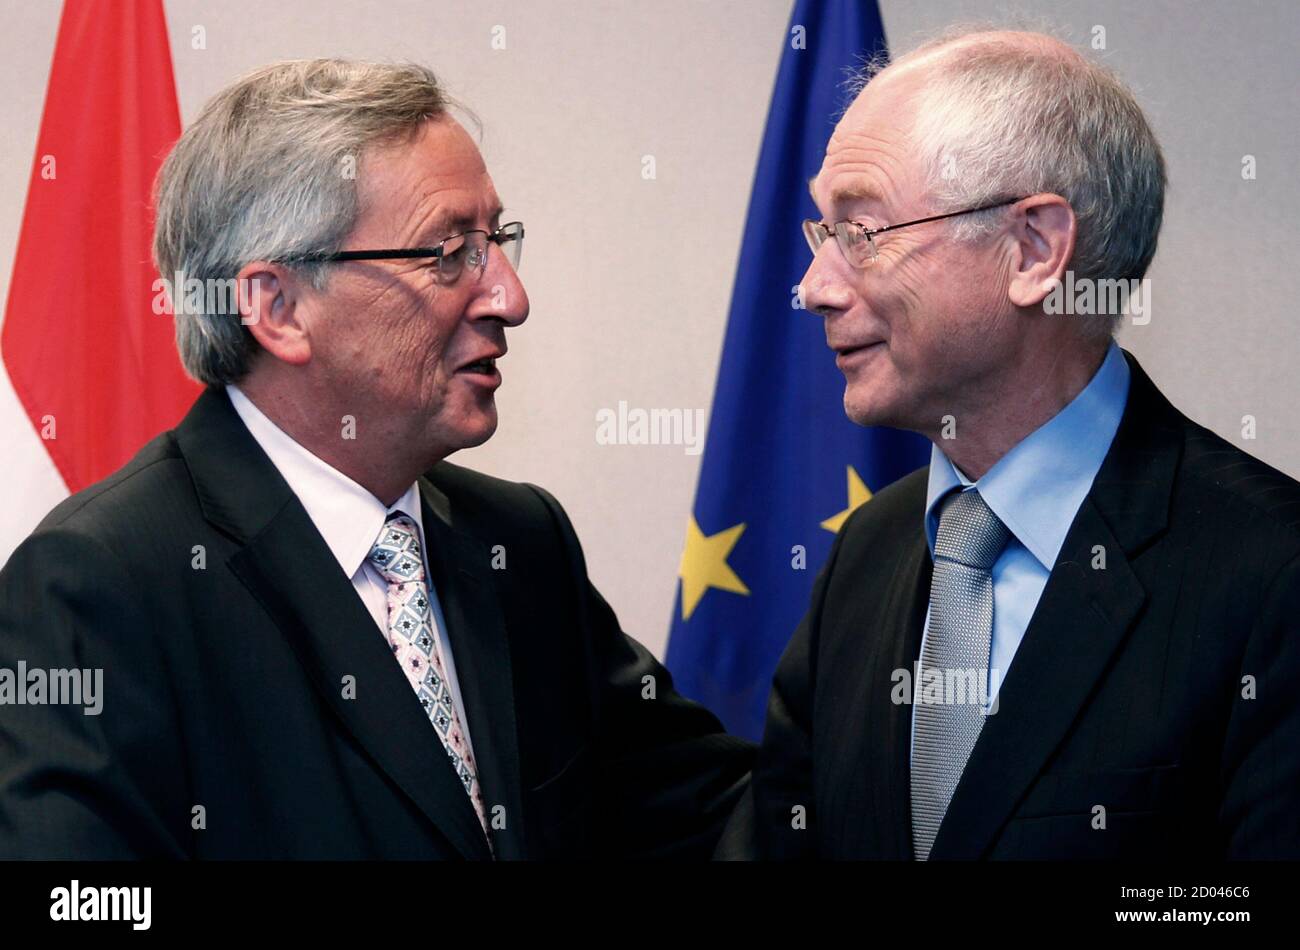 Luxembourg's Prime Minister and Eurogroup chairman Jean-Claude Juncker  talks to European Council President Herman Van Rompuy (R) as they pose  before their meeting at the EU Council in Brussels August 31, 2010.